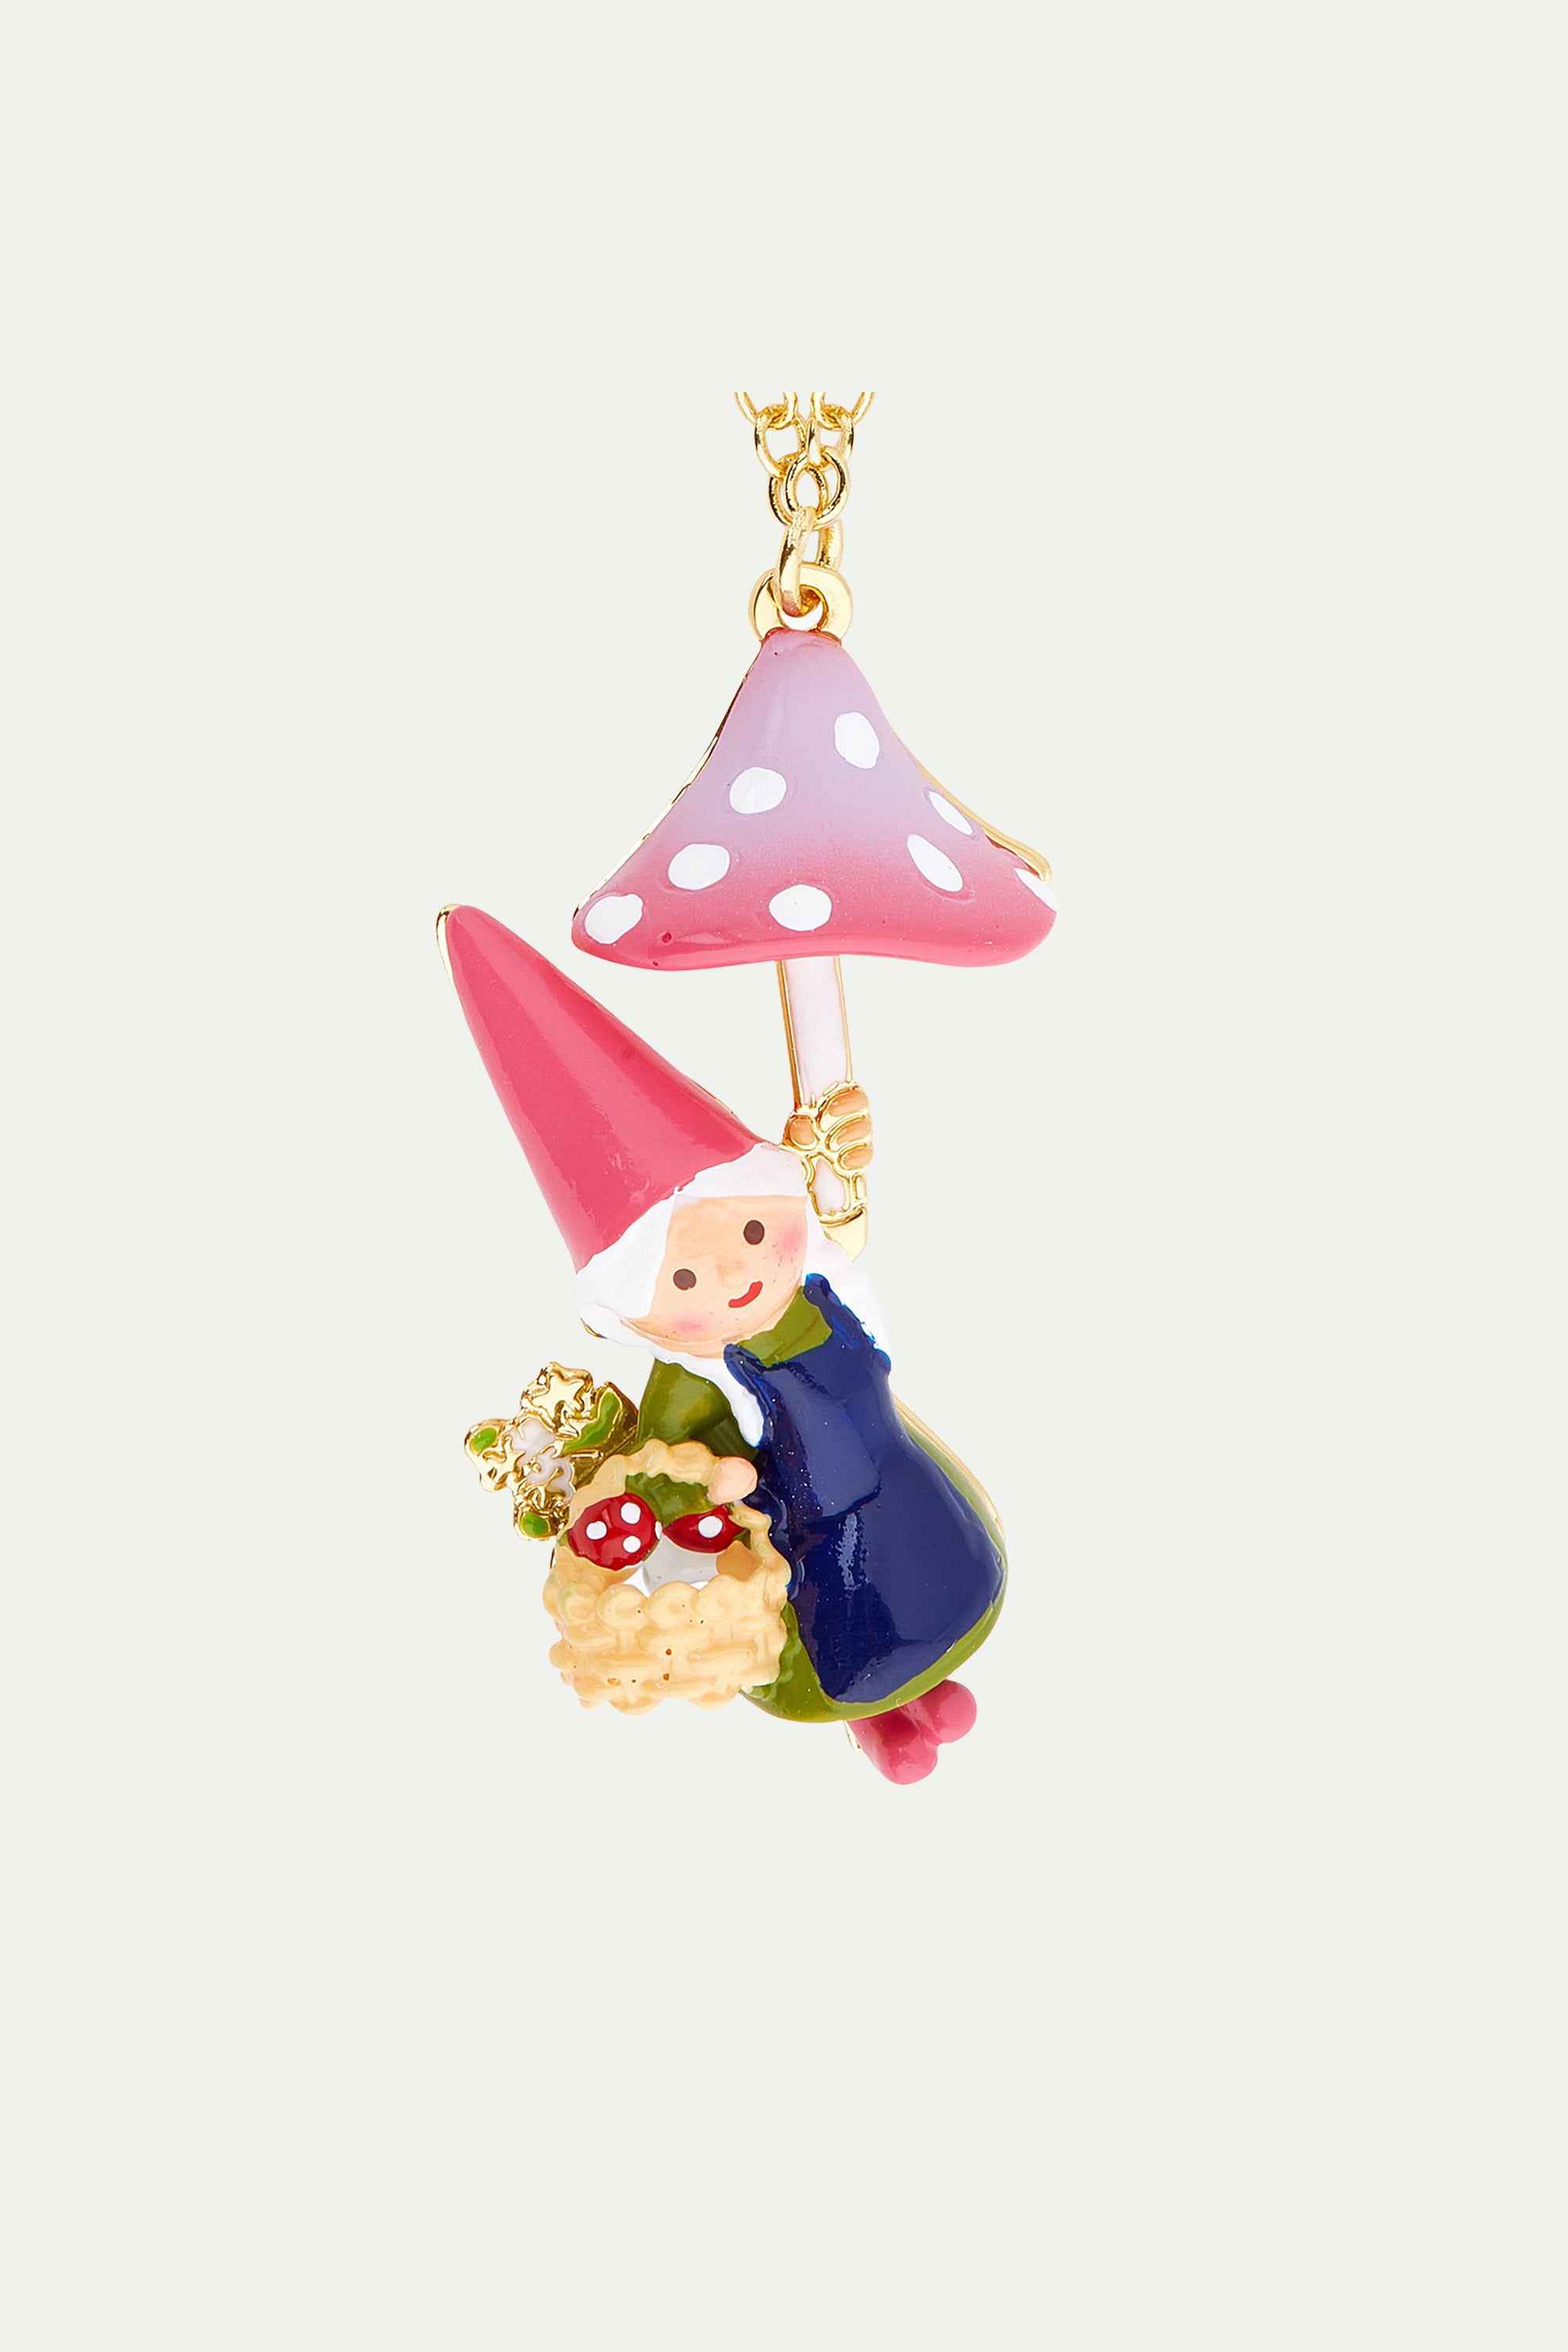 Garden gnome lady and mushroom picking pendant necklace